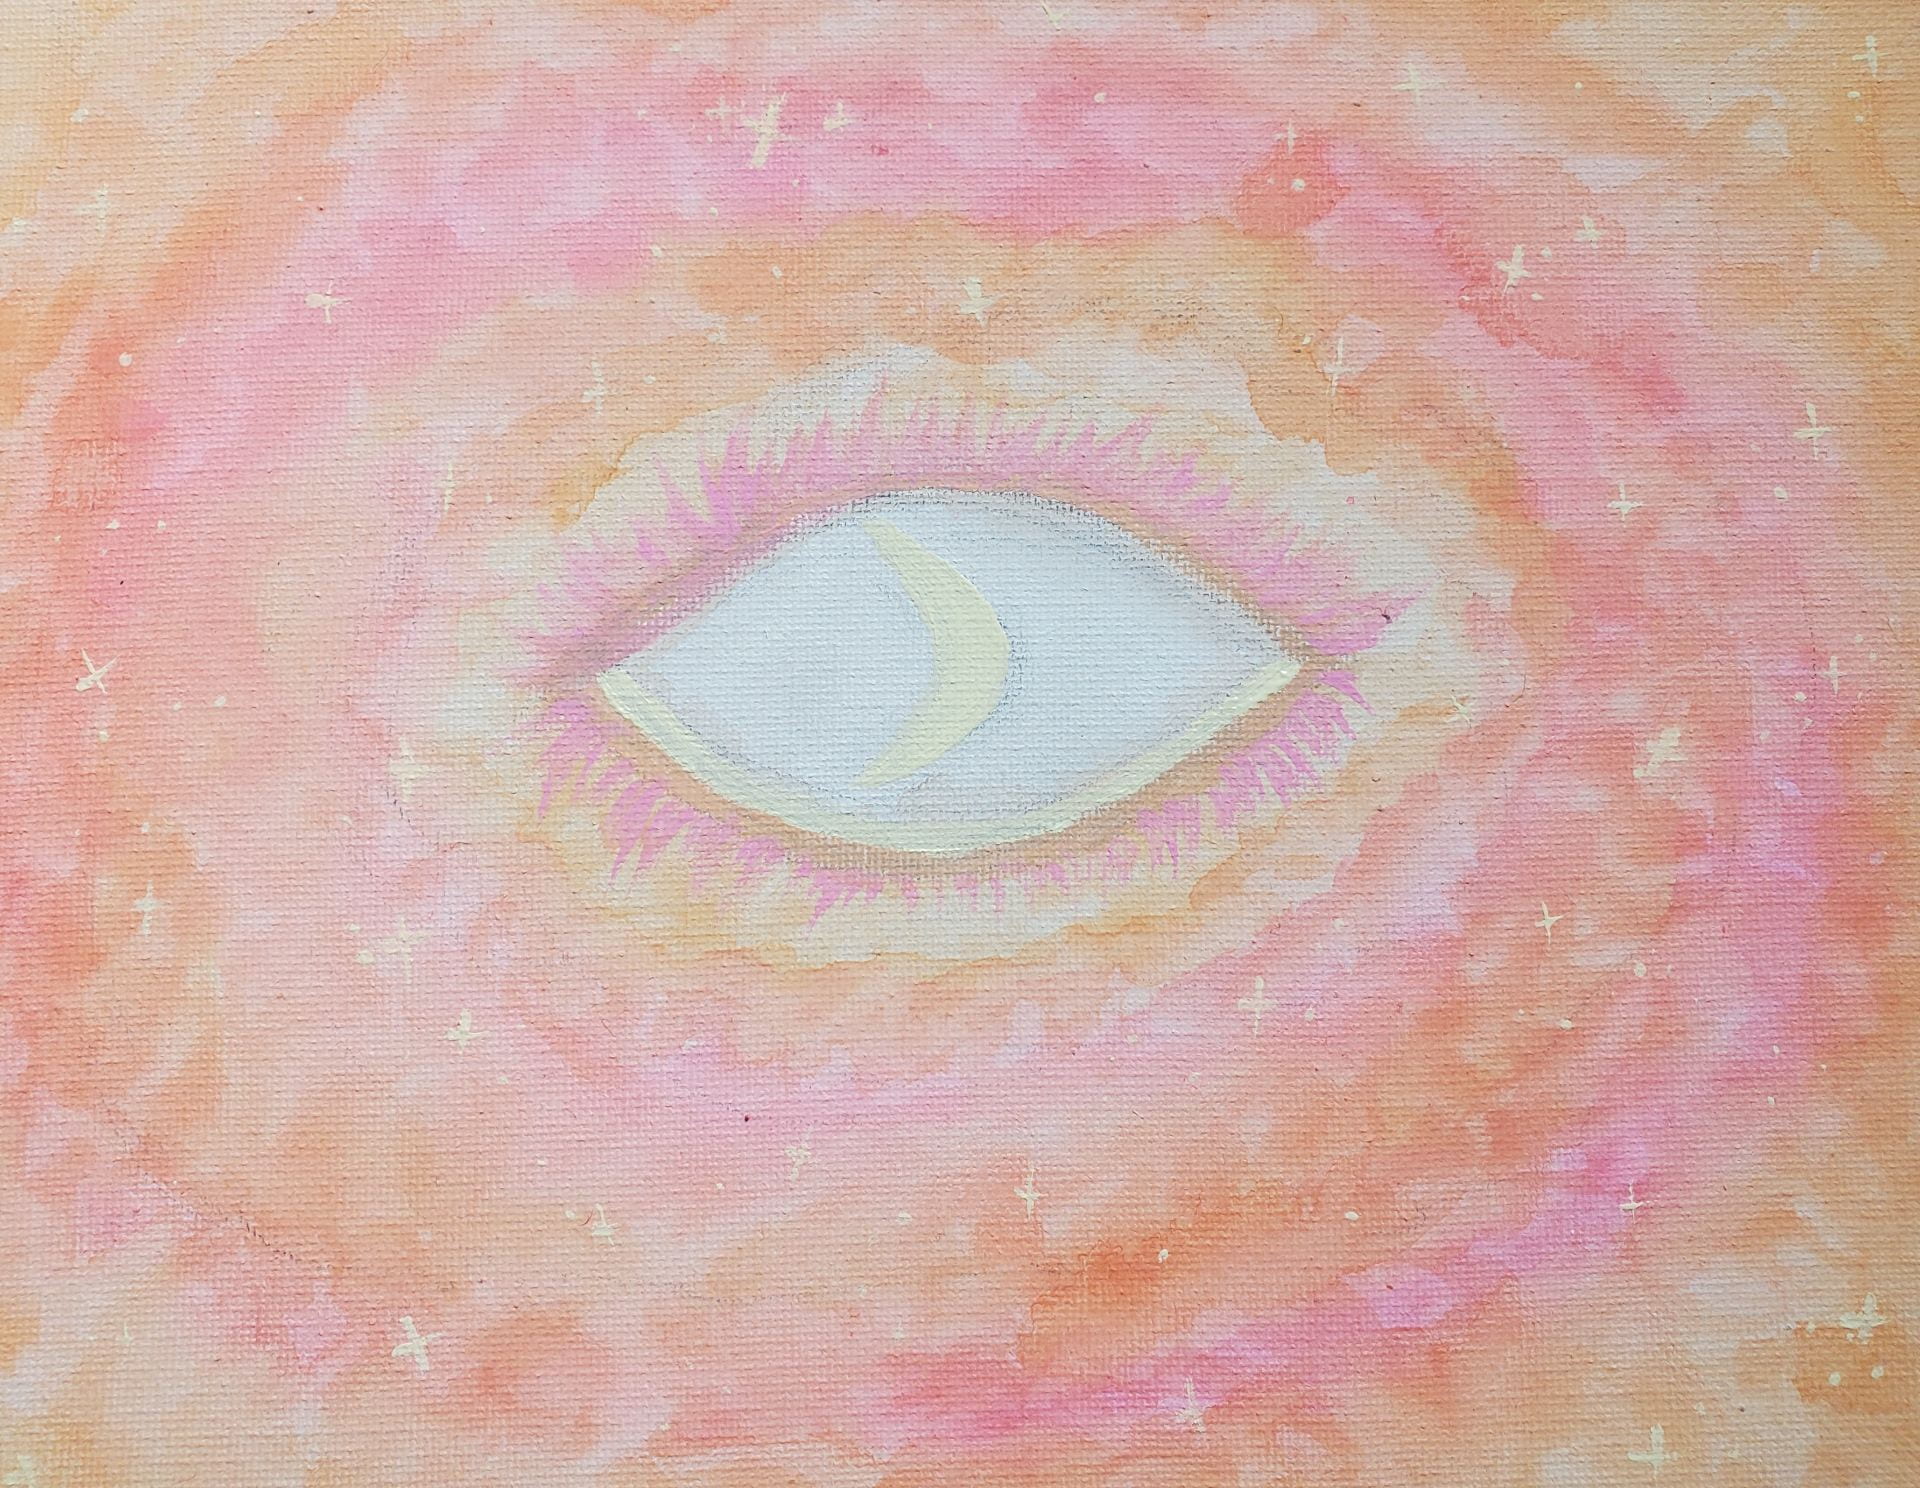 a painting of an opened eye with a half crescent in the middle, surrounded by lovely pinks, oranges, and yellows